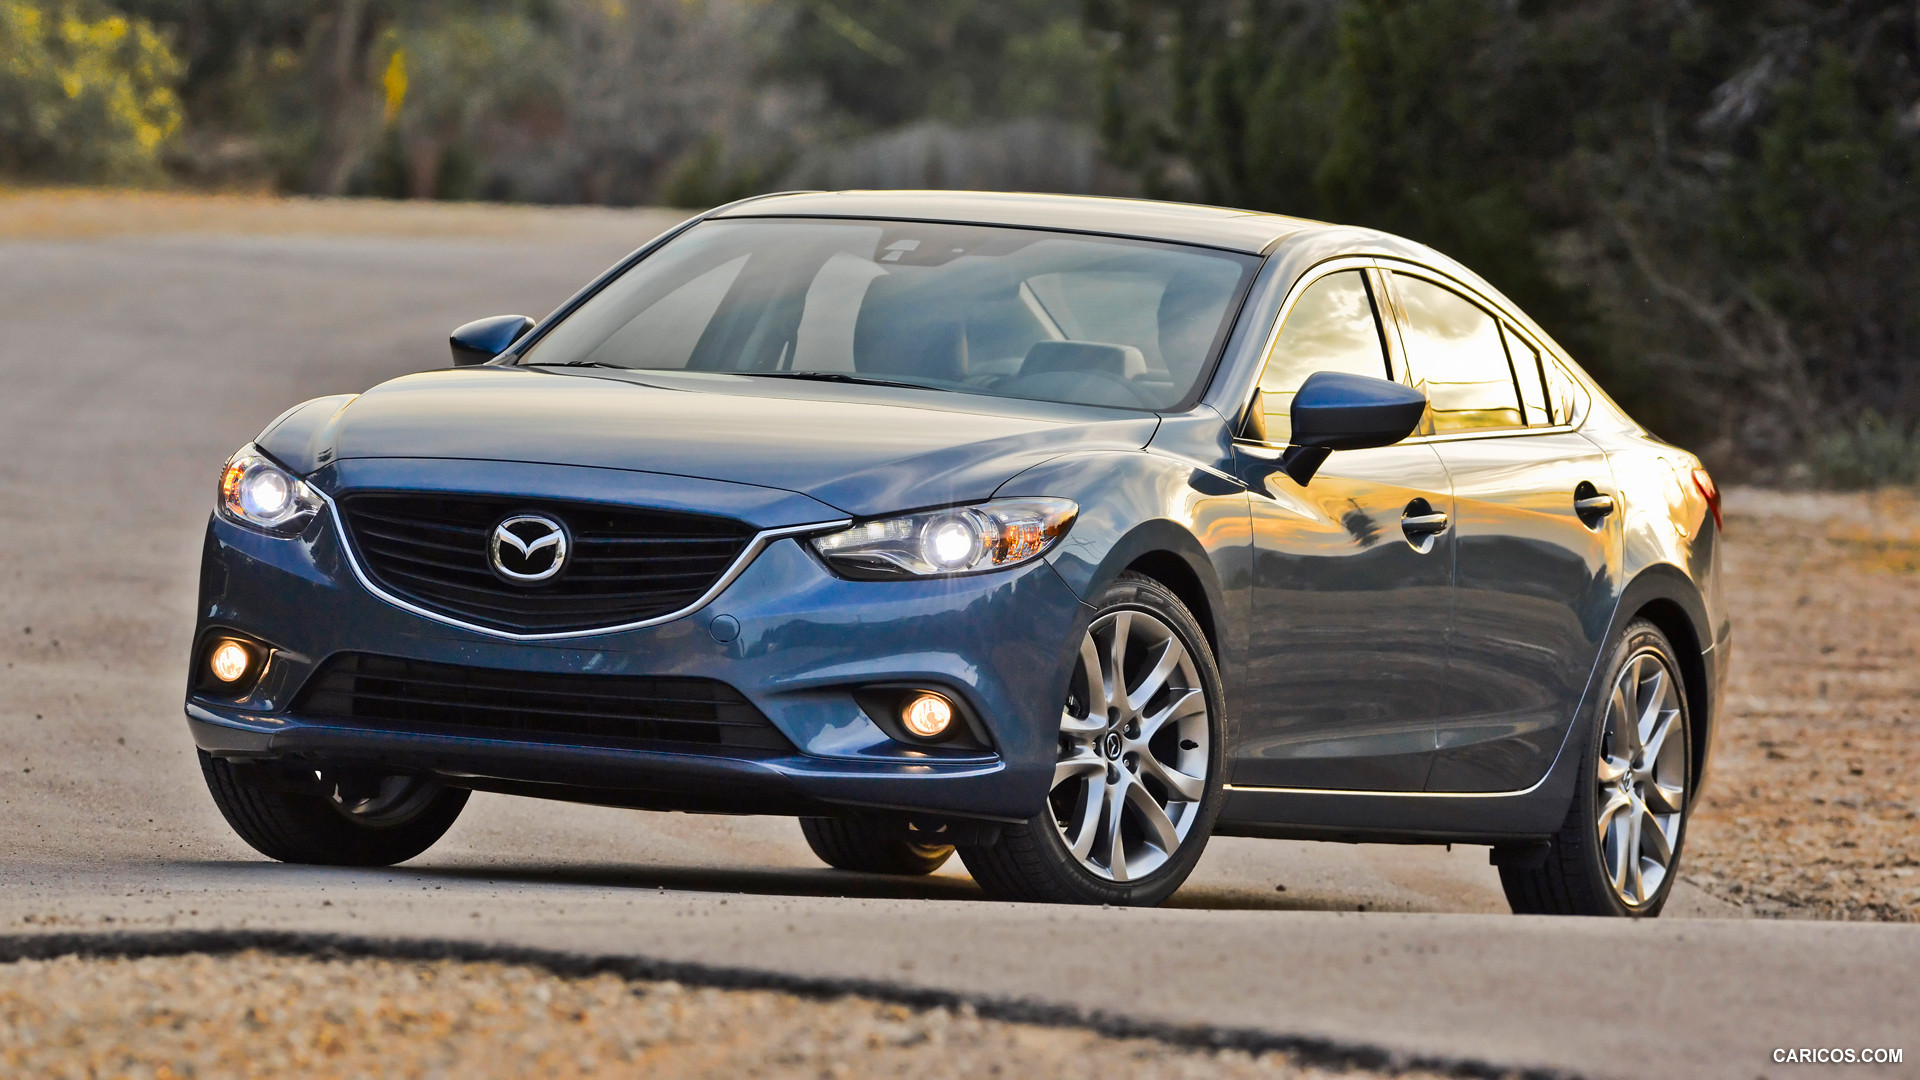 2014 Mazda6 GT - Front, #126 of 179